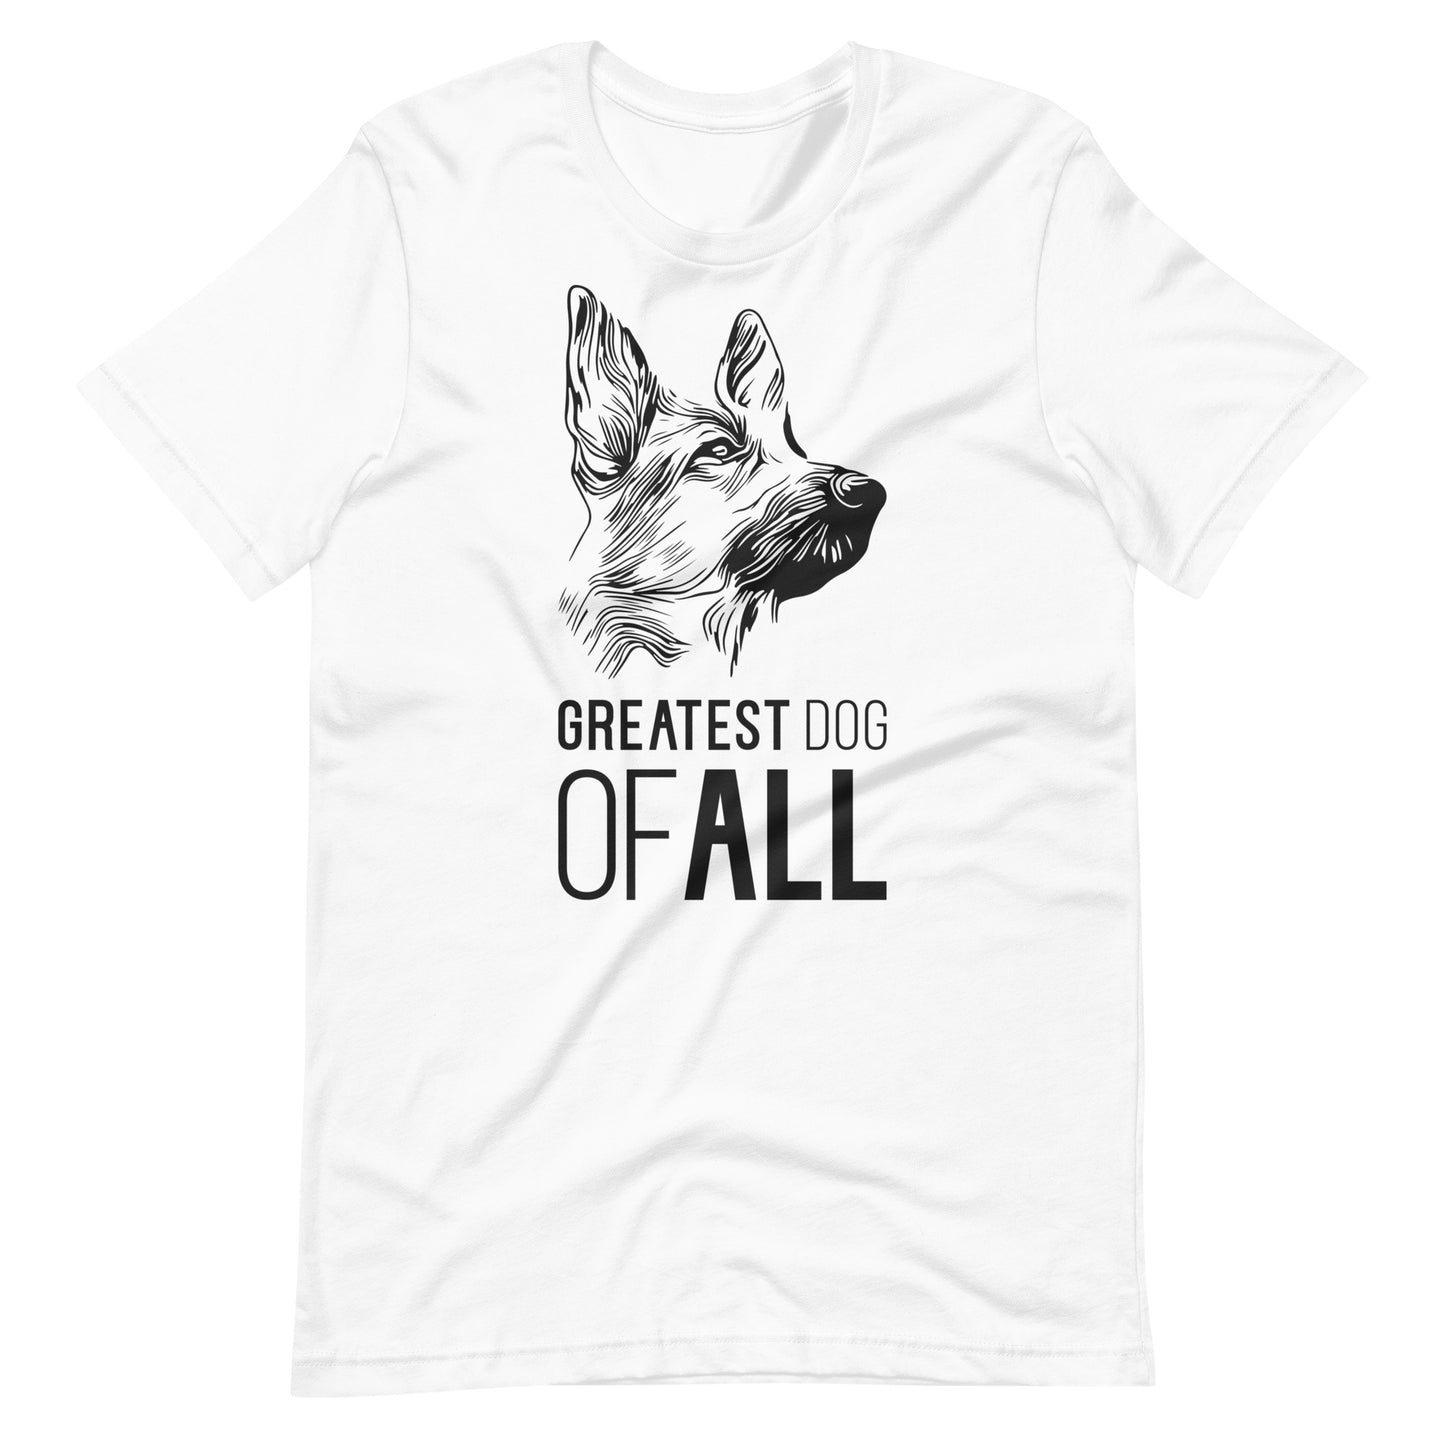 Black German Shepherd face silhouette with Greatest Dog of All caption on unisex white t-shirt